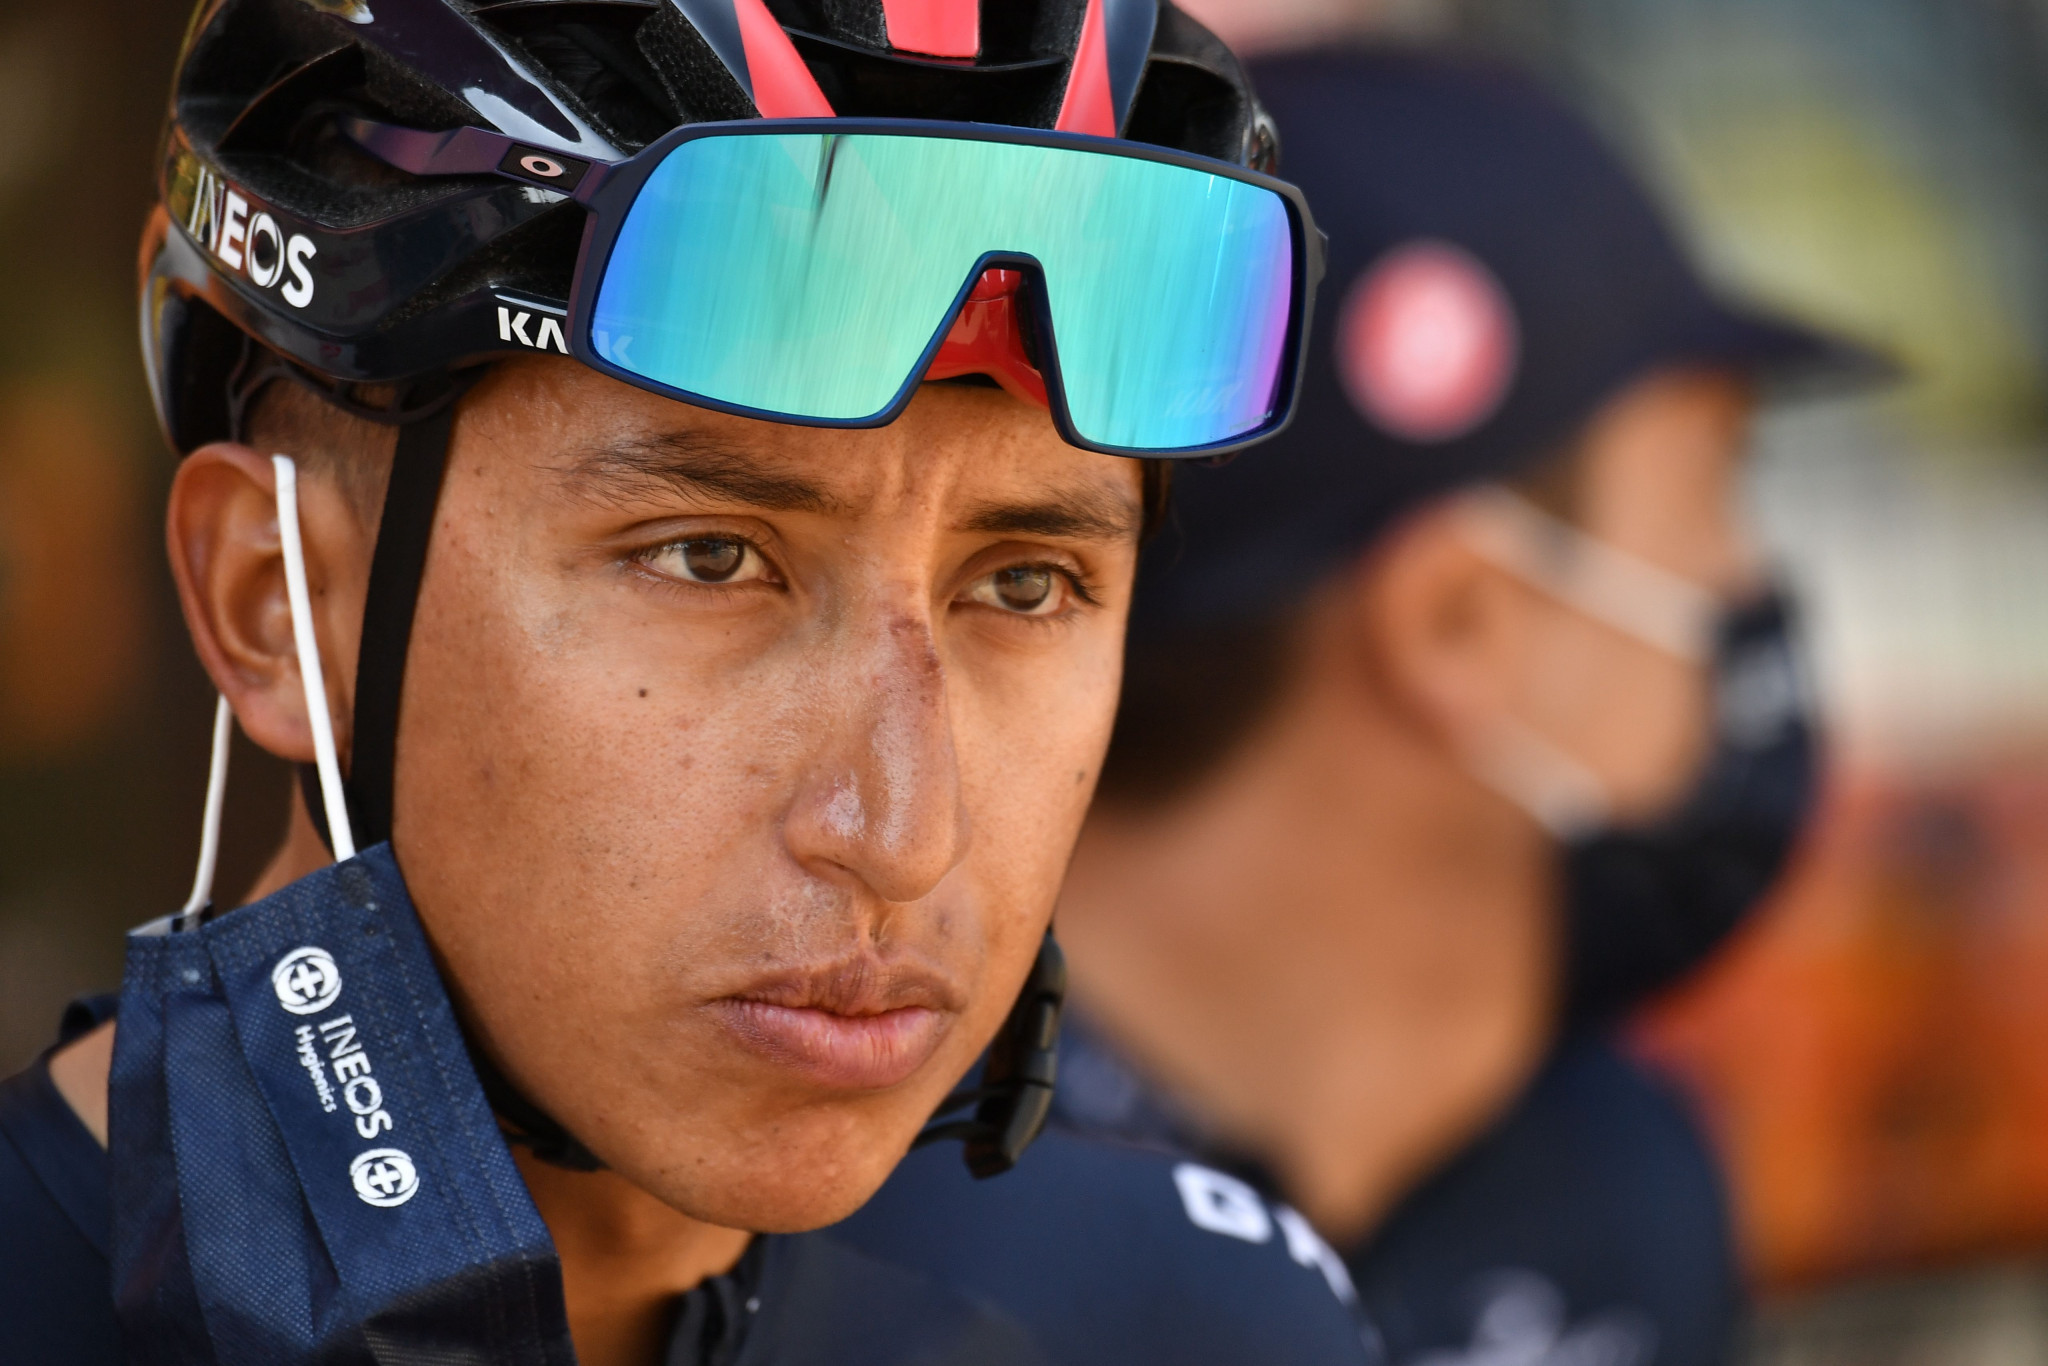 Egan Bernal's Tour de France defence looked over after another stage off the pace ©Getty Images